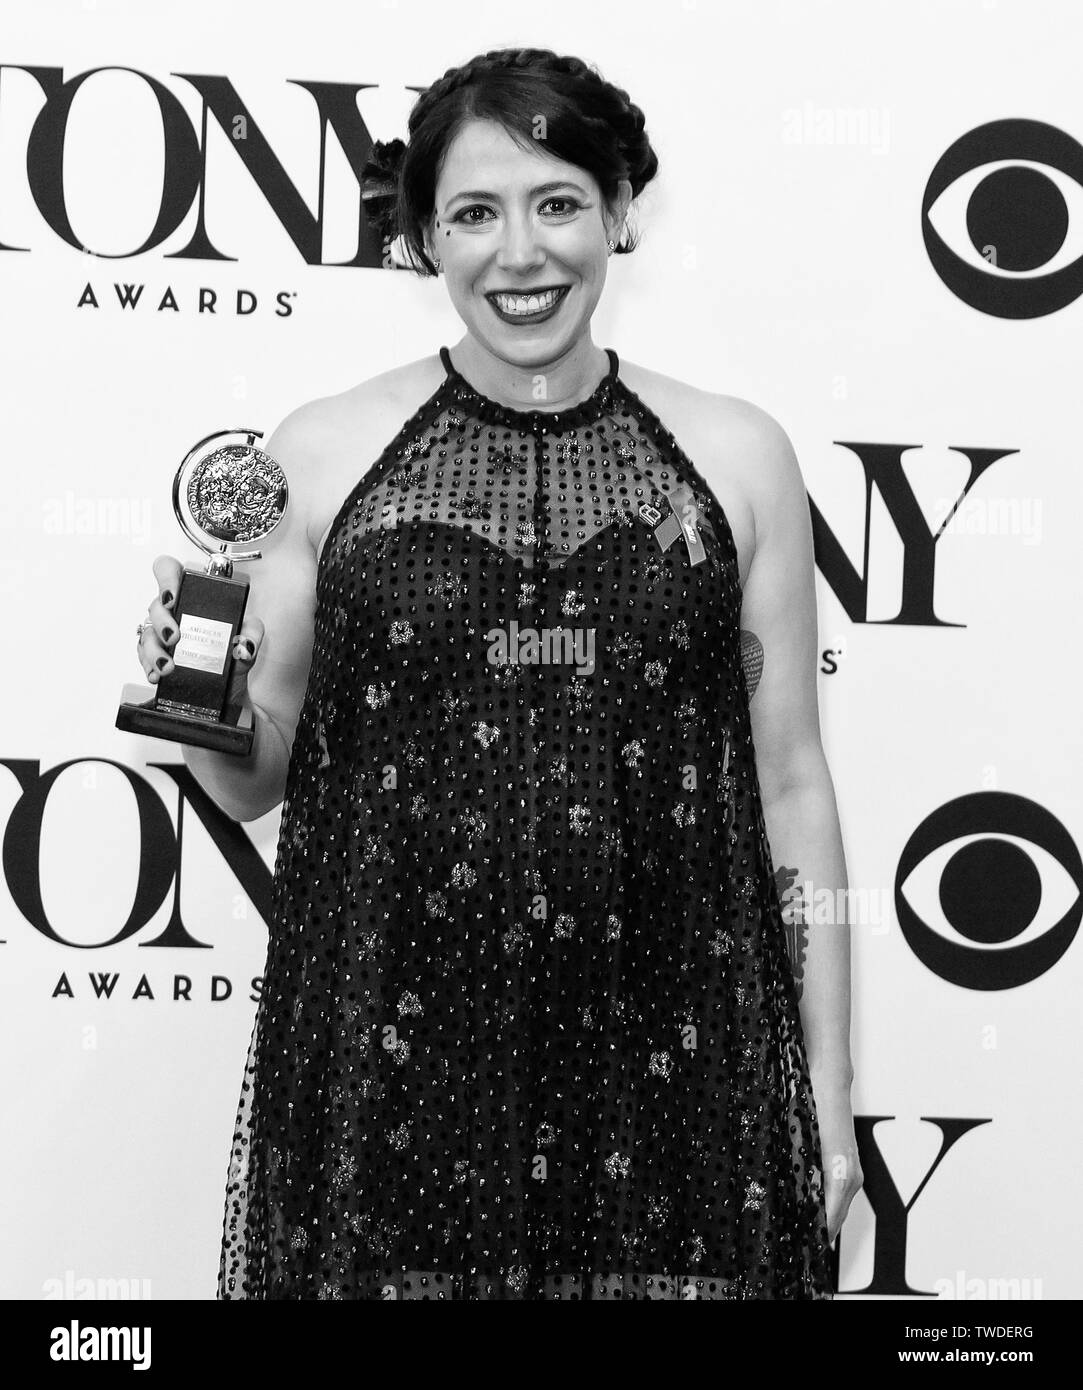 New York, NY - June 09, 2019: Rachel Chavkin - Best Direction of a Musical - 'Hadestown'  poses in the press room for the 73rd Annual Tony Awards Stock Photo